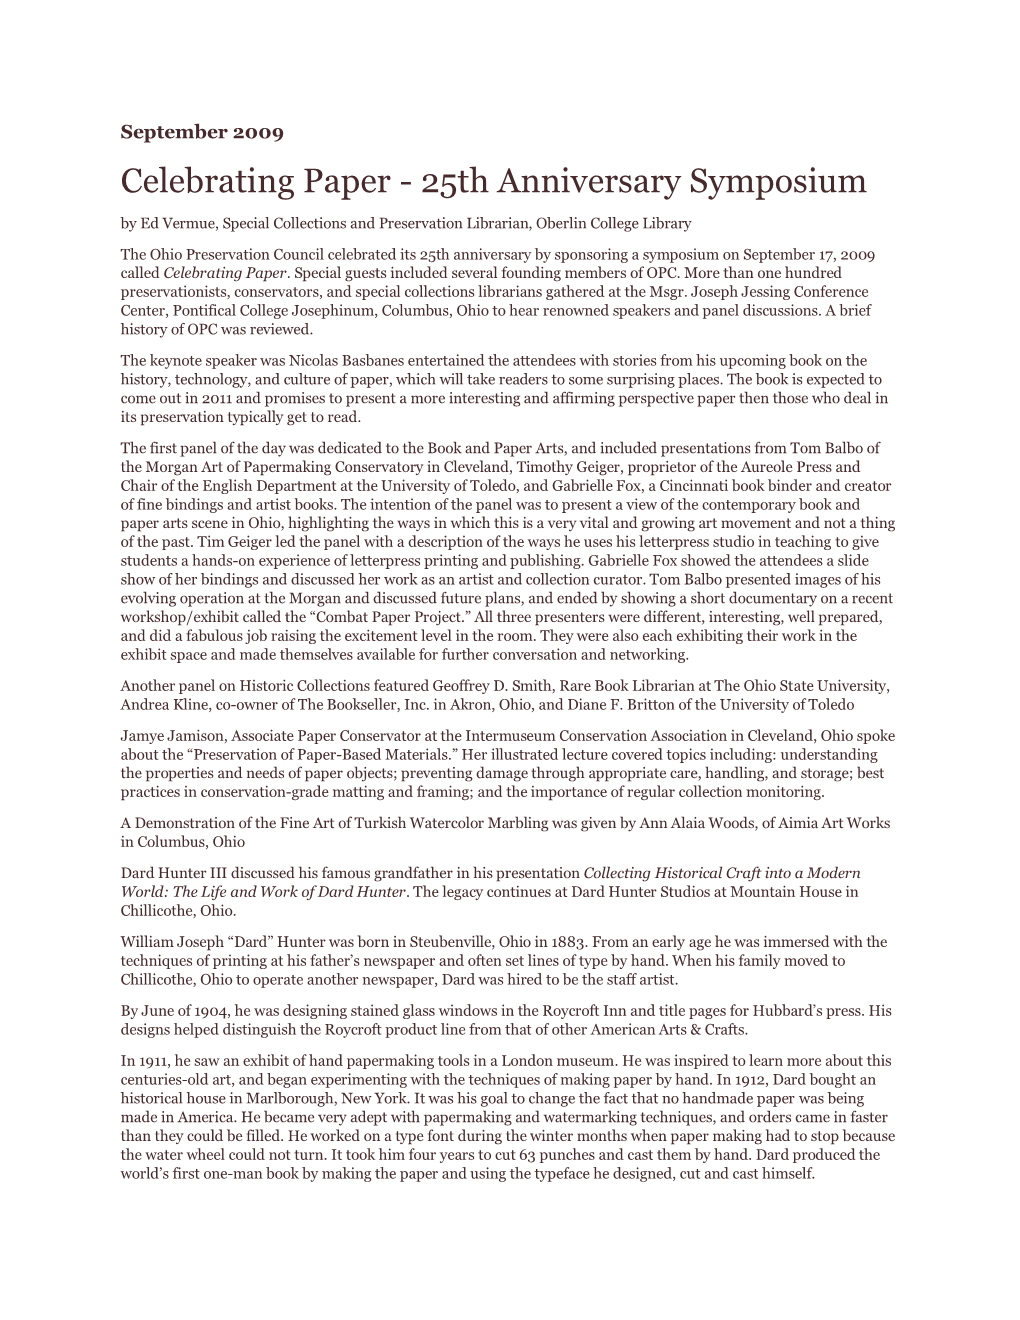 Celebrating Paper - 25Th Anniversary Symposium by Ed Vermue, Special Collections and Preservation Librarian, Oberlin College Library